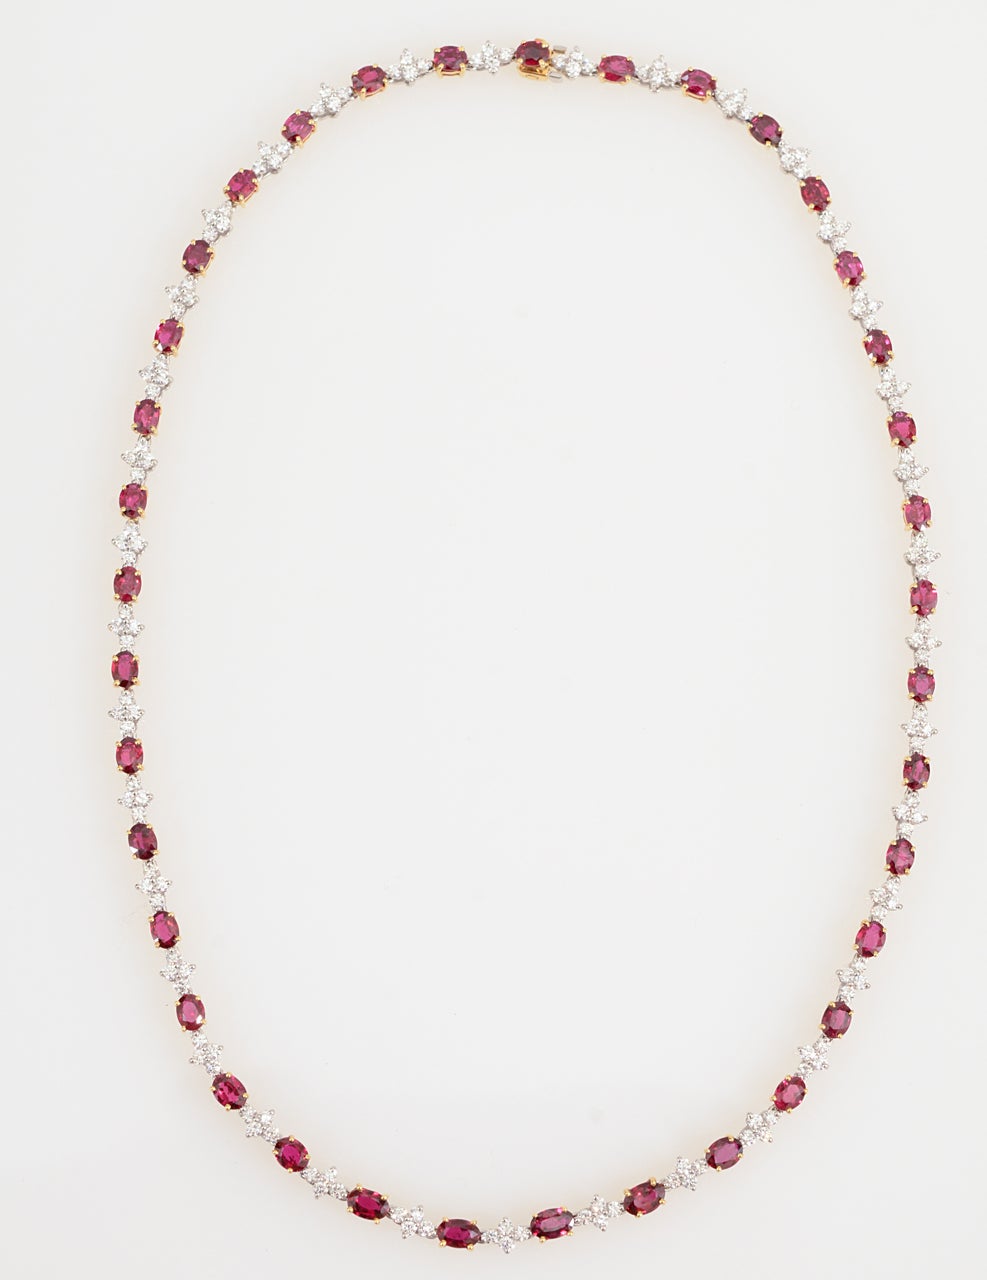 TIFFANY & CO. Ruby & Diamond Platinum Necklace.

Platinum & 18K Gold
37 Oval Ruby- approximately 20.50carats in rubies
148 Round Diamonds- Approximately 6 carats in diamonds.